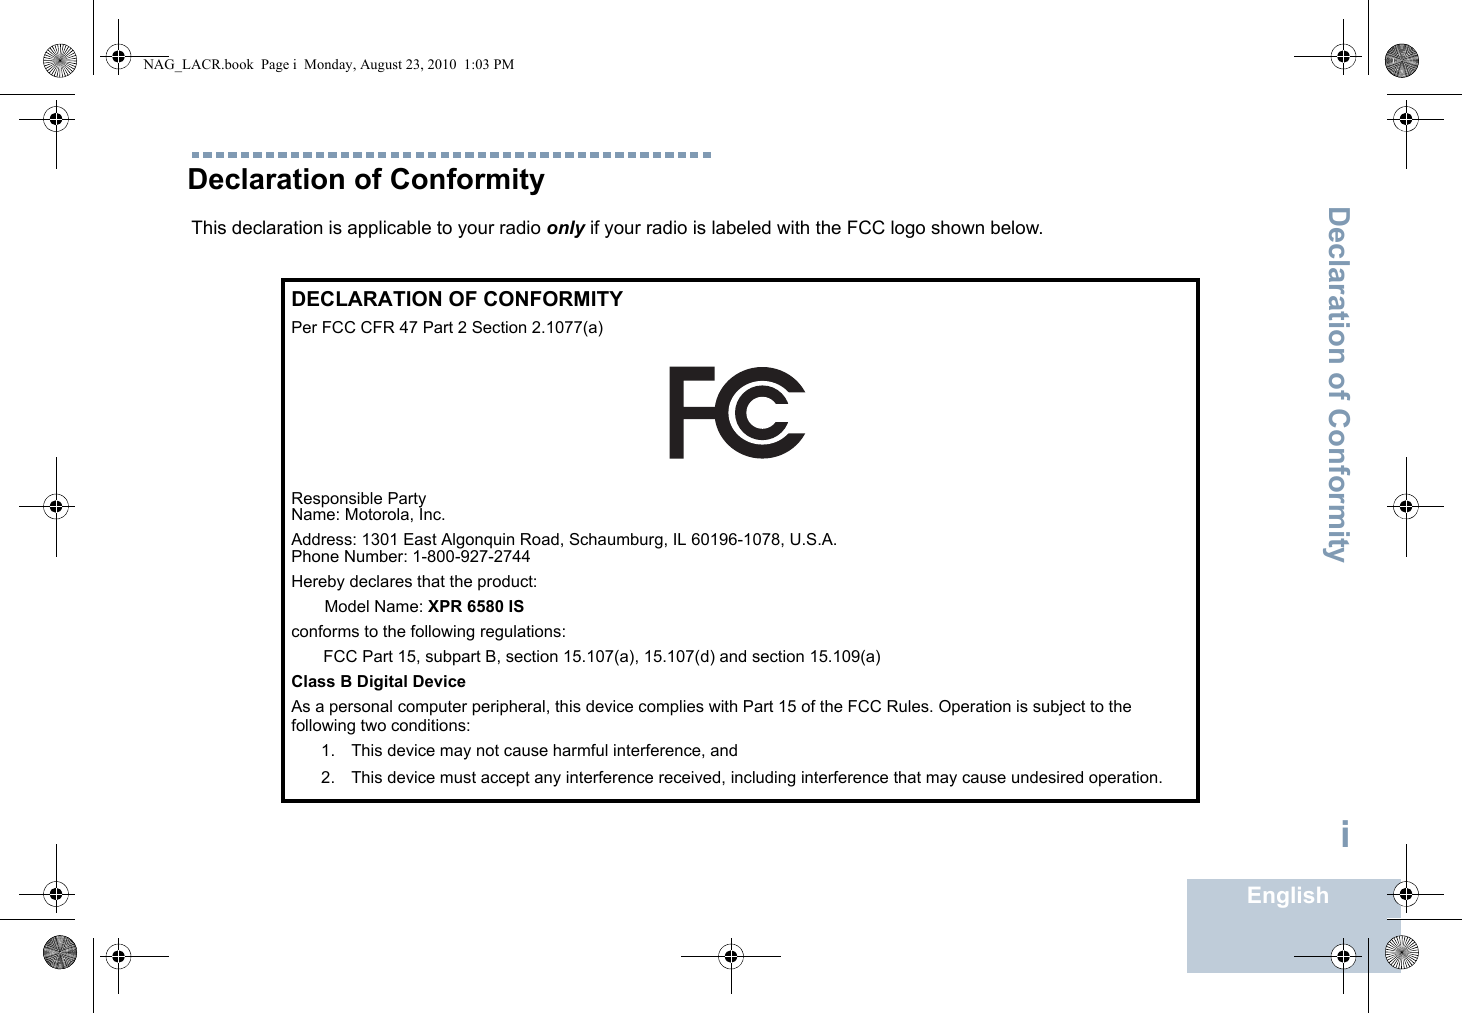 Declaration of ConformityEnglishiDeclaration of ConformityThis declaration is applicable to your radio only if your radio is labeled with the FCC logo shown below.DECLARATION OF CONFORMITYPer FCC CFR 47 Part 2 Section 2.1077(a)Responsible Party Name: Motorola, Inc.Address: 1301 East Algonquin Road, Schaumburg, IL 60196-1078, U.S.A.Phone Number: 1-800-927-2744Hereby declares that the product:Model Name: XPR 6580 ISconforms to the following regulations:FCC Part 15, subpart B, section 15.107(a), 15.107(d) and section 15.109(a)Class B Digital DeviceAs a personal computer peripheral, this device complies with Part 15 of the FCC Rules. Operation is subject to the following two conditions:1. This device may not cause harmful interference, and 2. This device must accept any interference received, including interference that may cause undesired operation.NAG_LACR.book  Page i  Monday, August 23, 2010  1:03 PM